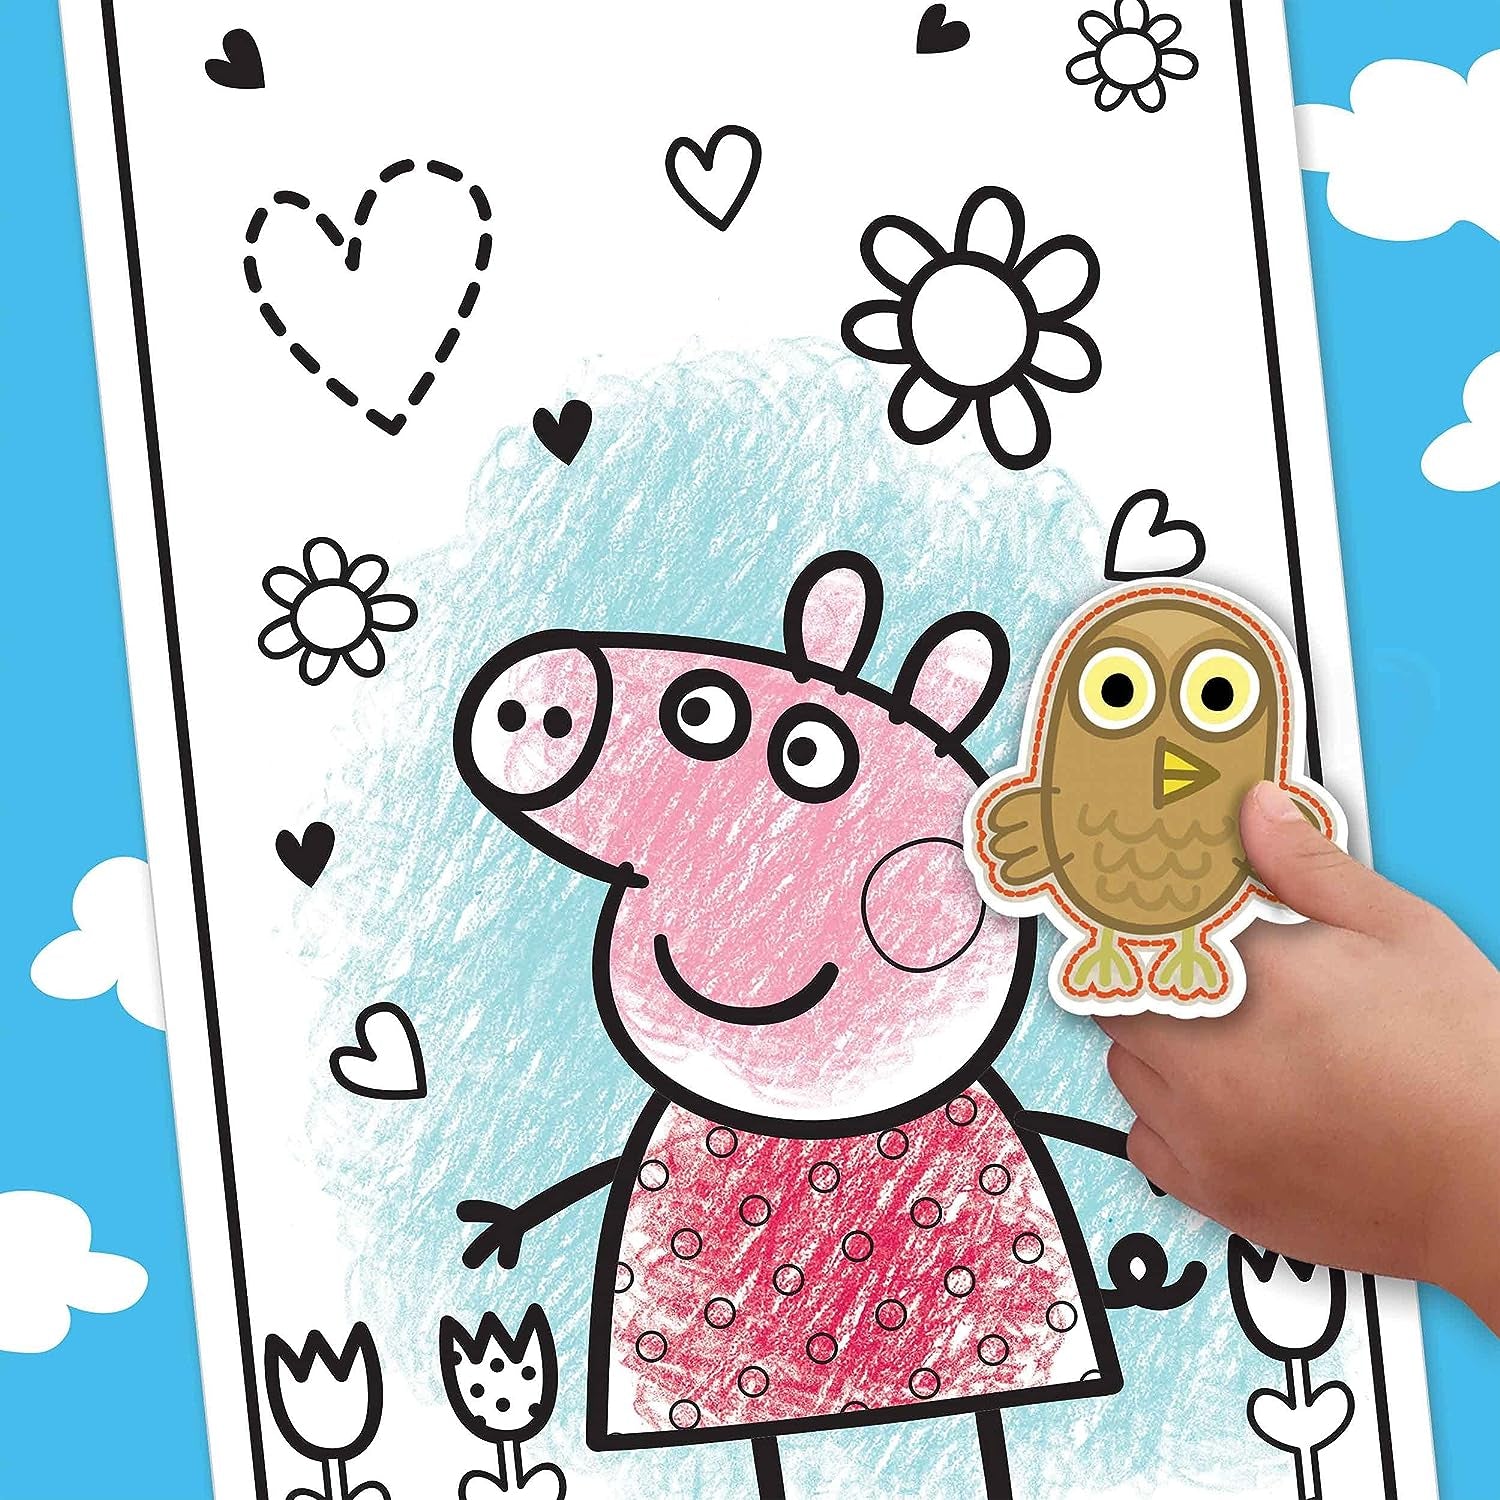 Crayola Peppa Pig Coloring Book with Stickers, Gift for Kids, 96 Pages